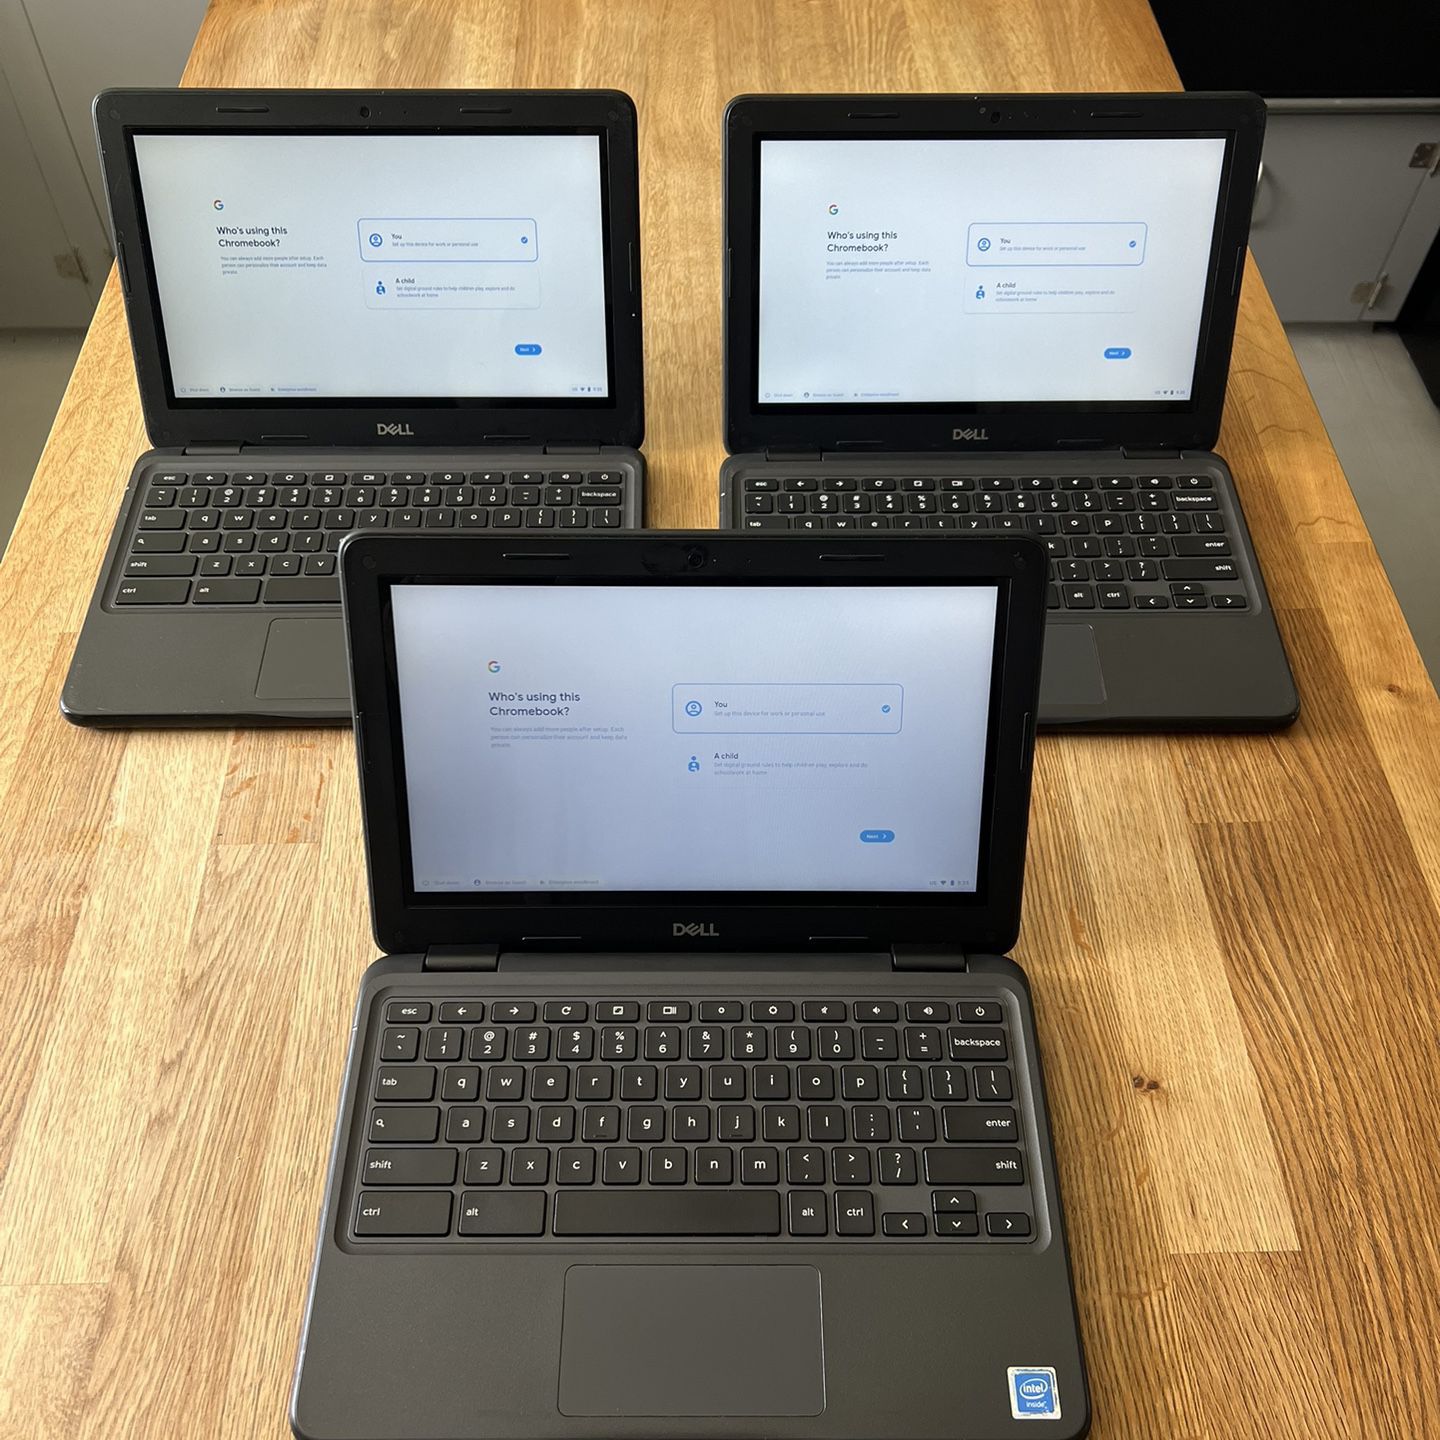 Dell Touchscreen ChromeBook 5190 Laptops - 3 Available / $30 Each